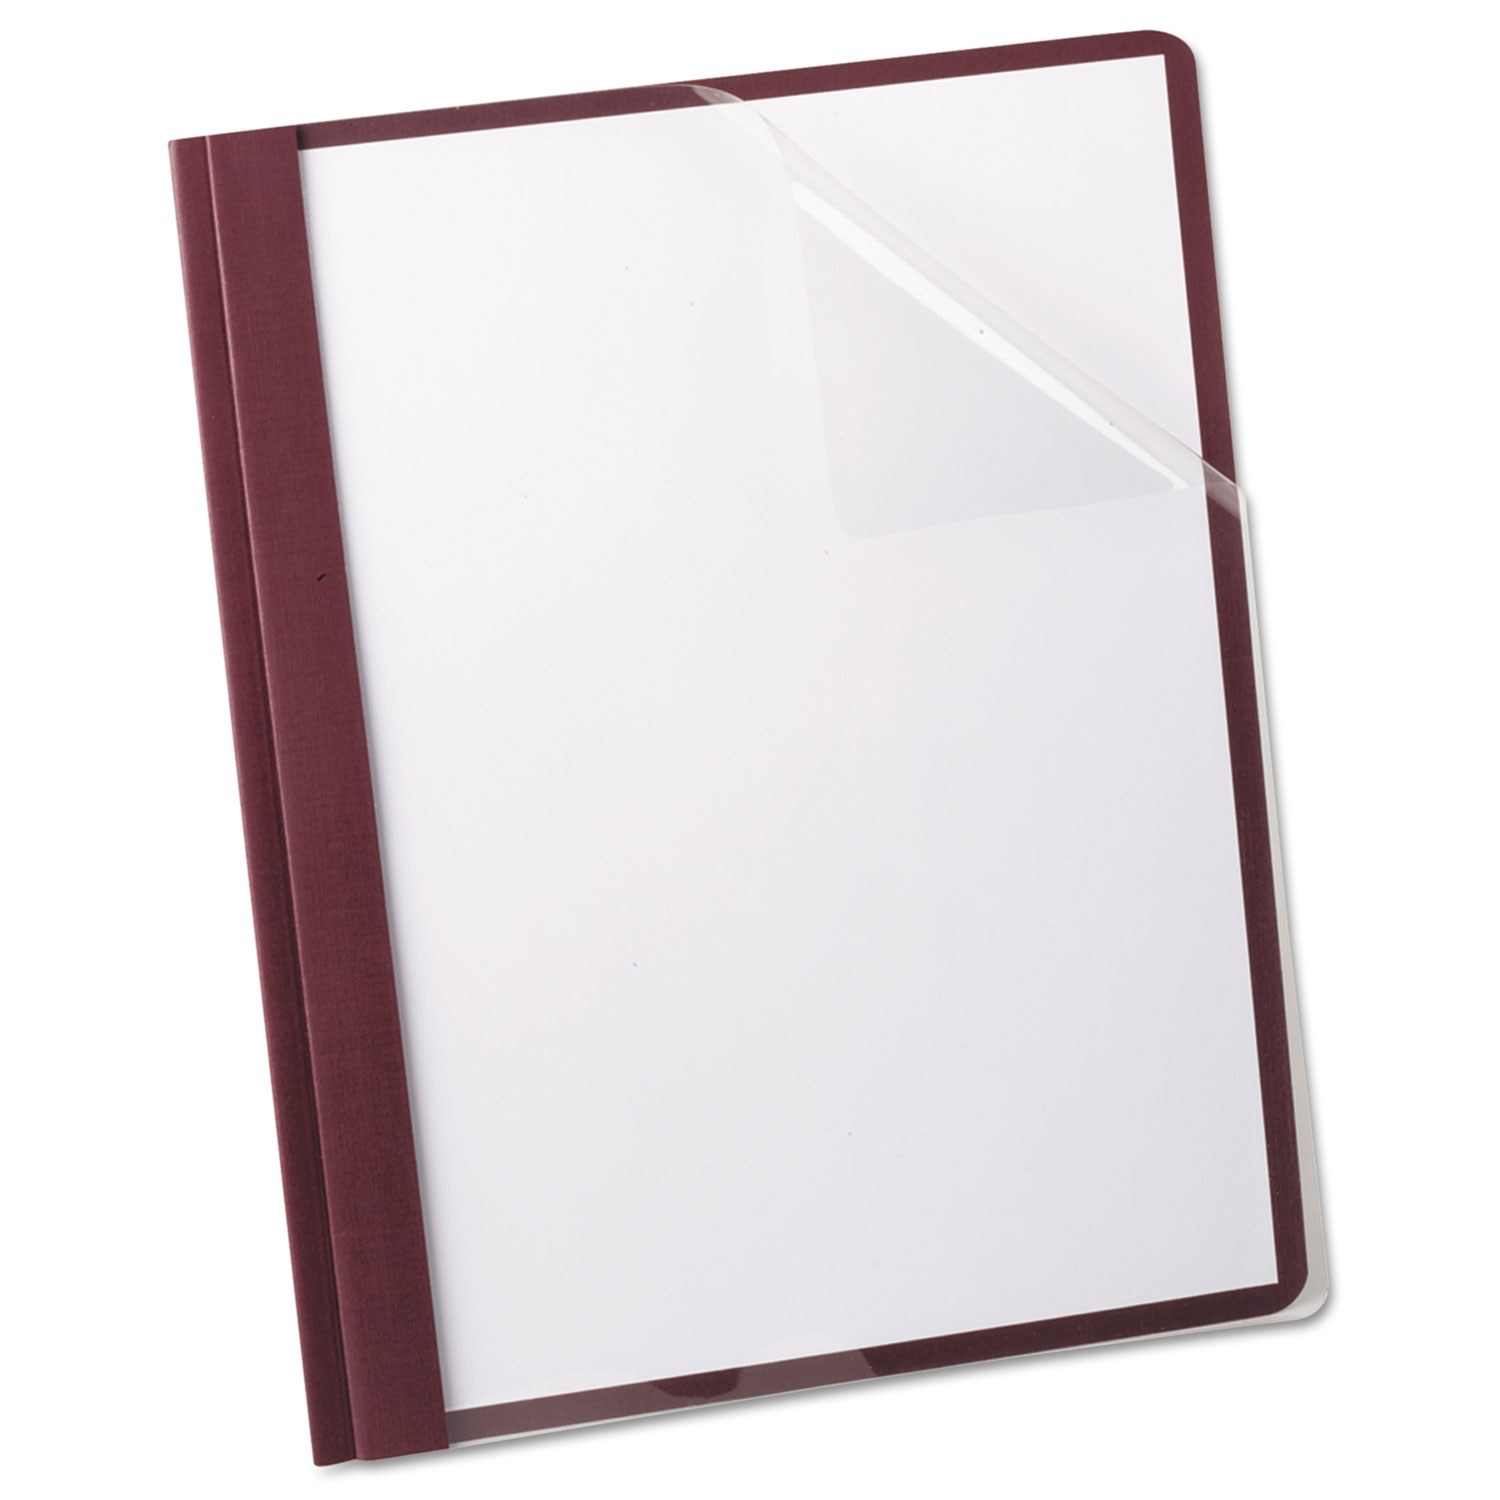 Linen Finish Clear Front Report Cover, 3 Fasteners, Letter, Burgundy, 25/Box